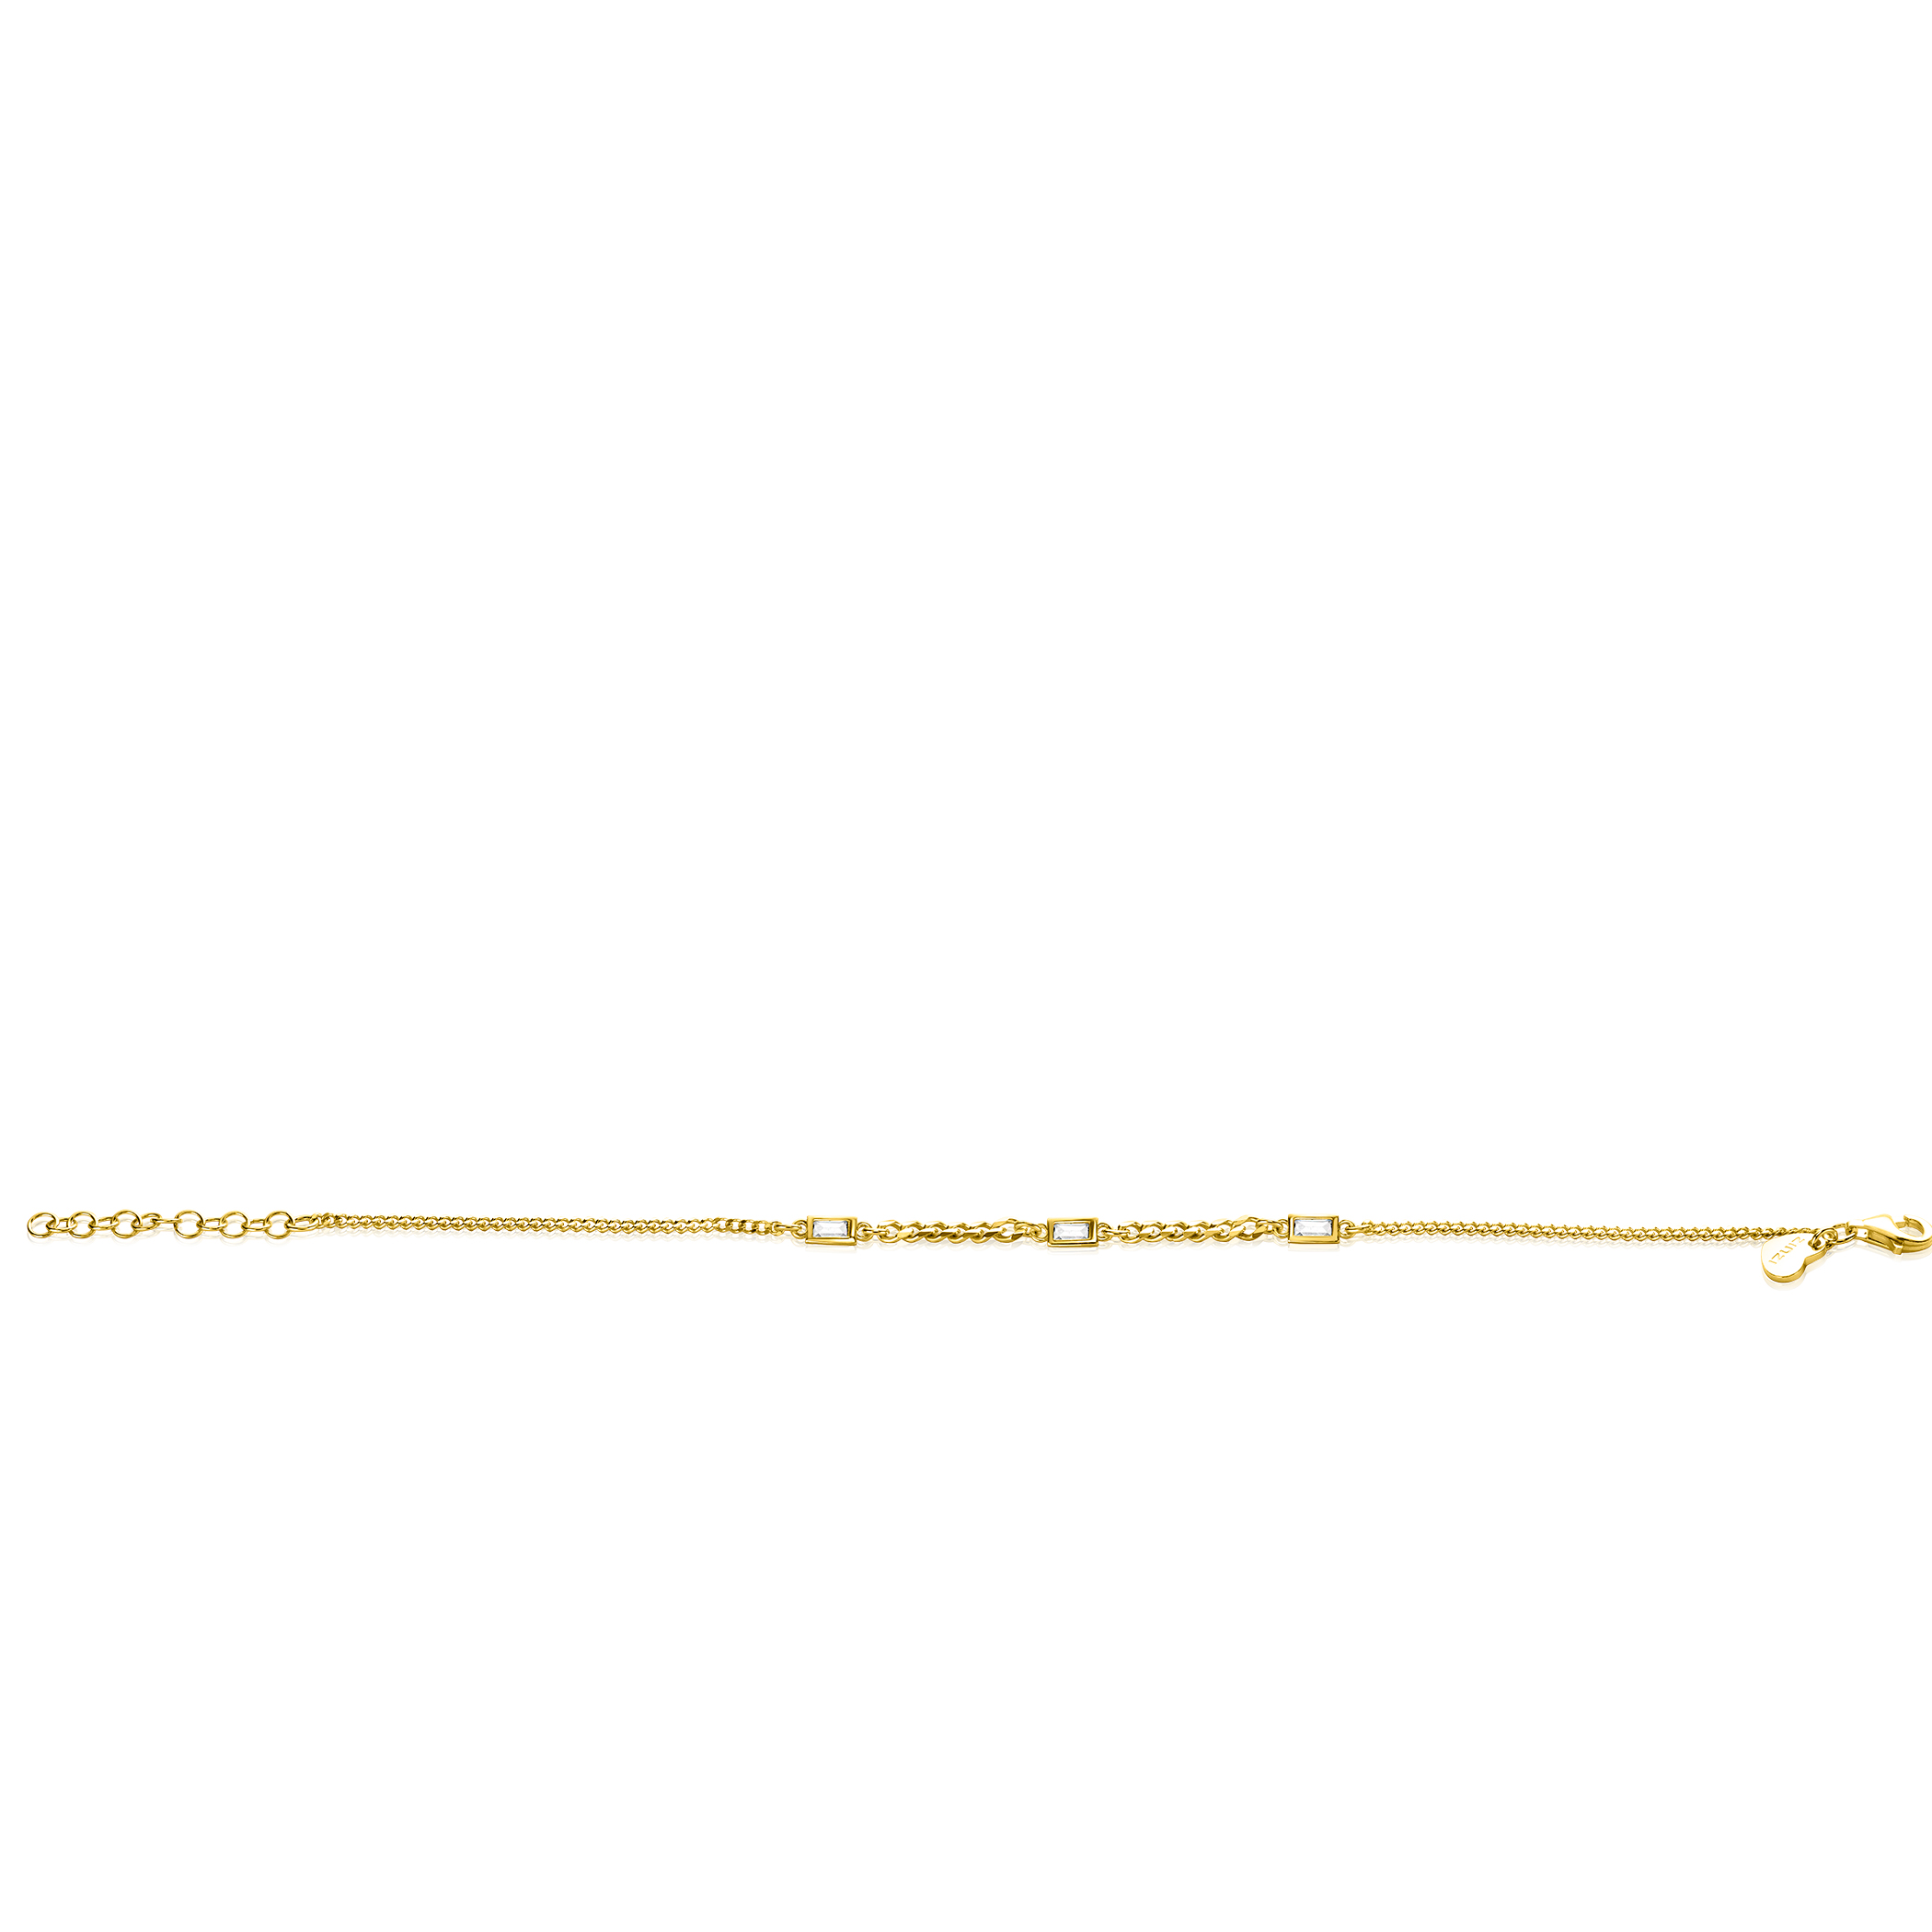 ZINZI Gold Plated Sterling Silver Bracelet with Curb Chains in Different Sizes Combined with 3 Rectangular Baguette Cut Zirconias 17-20cm ZIA2410